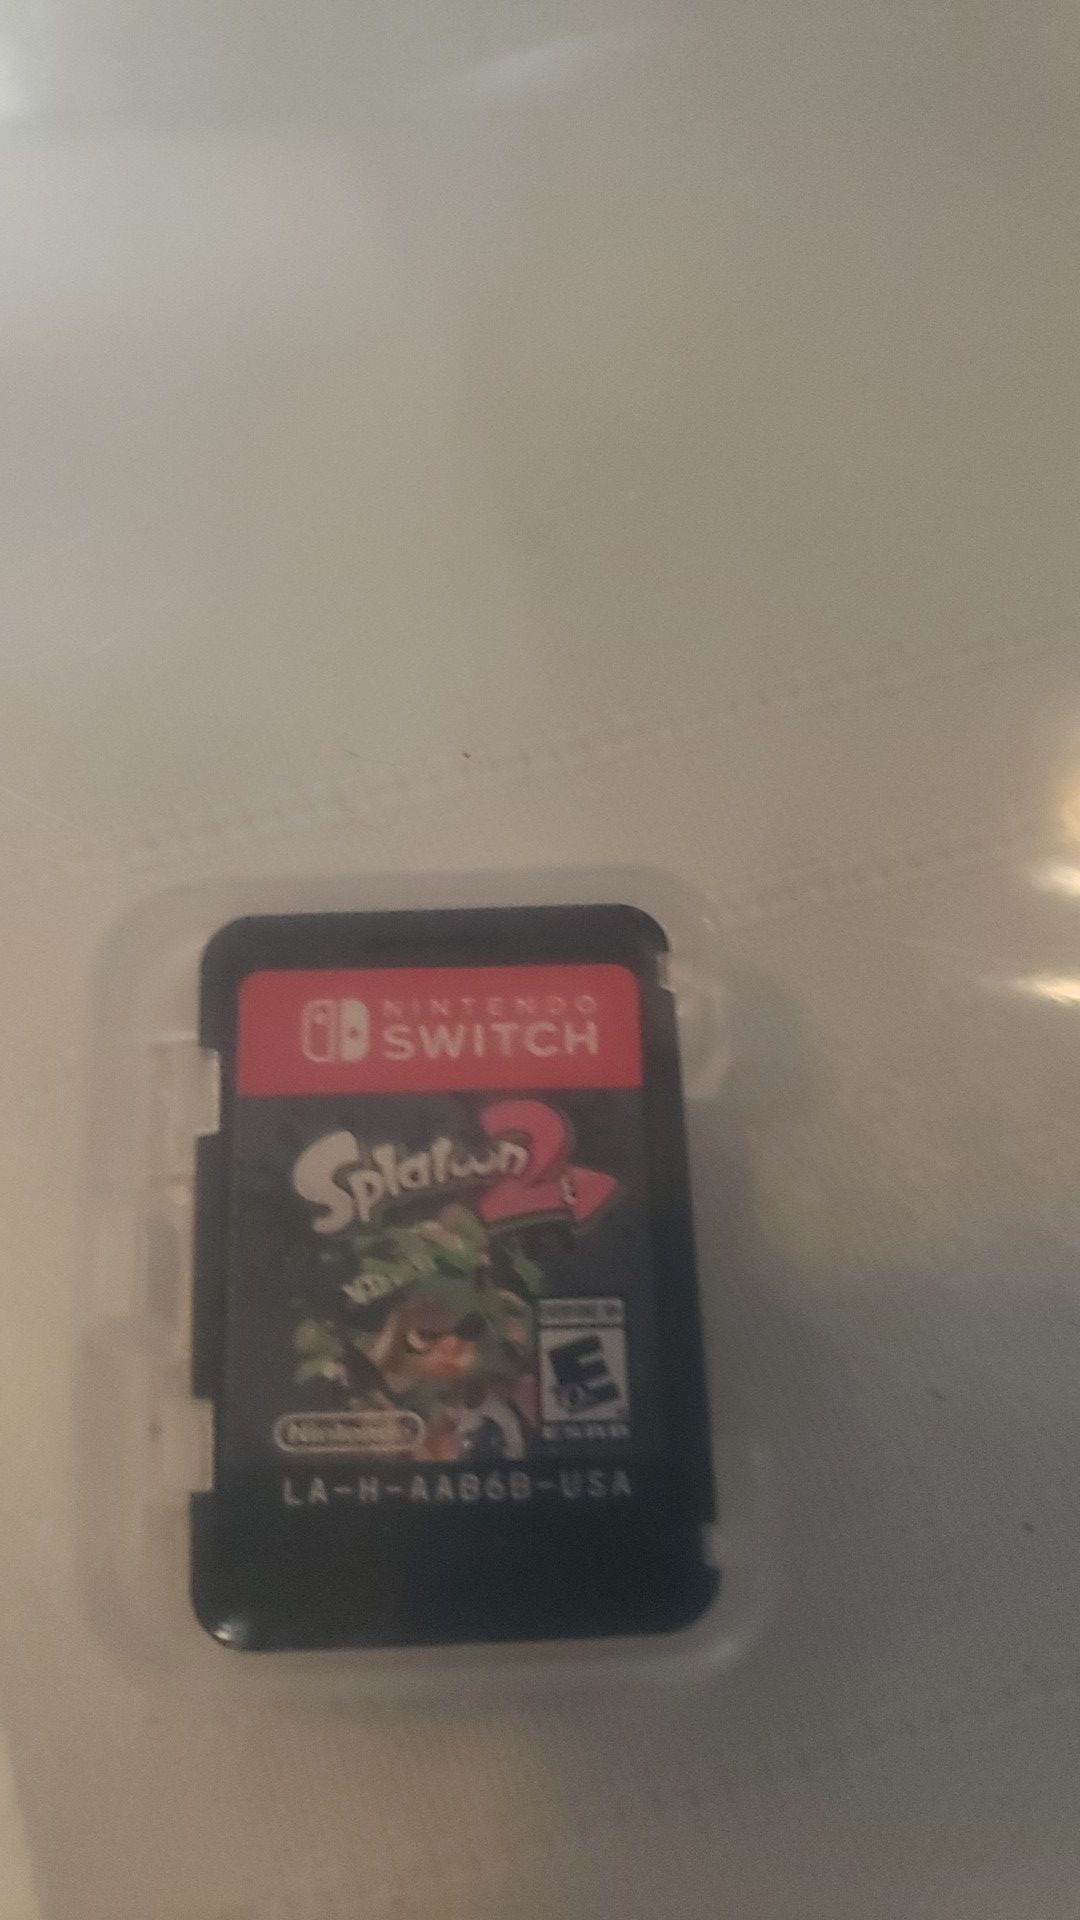 Splatoon 2 ( without cover art ) CAN NEGOTIATE PRICE